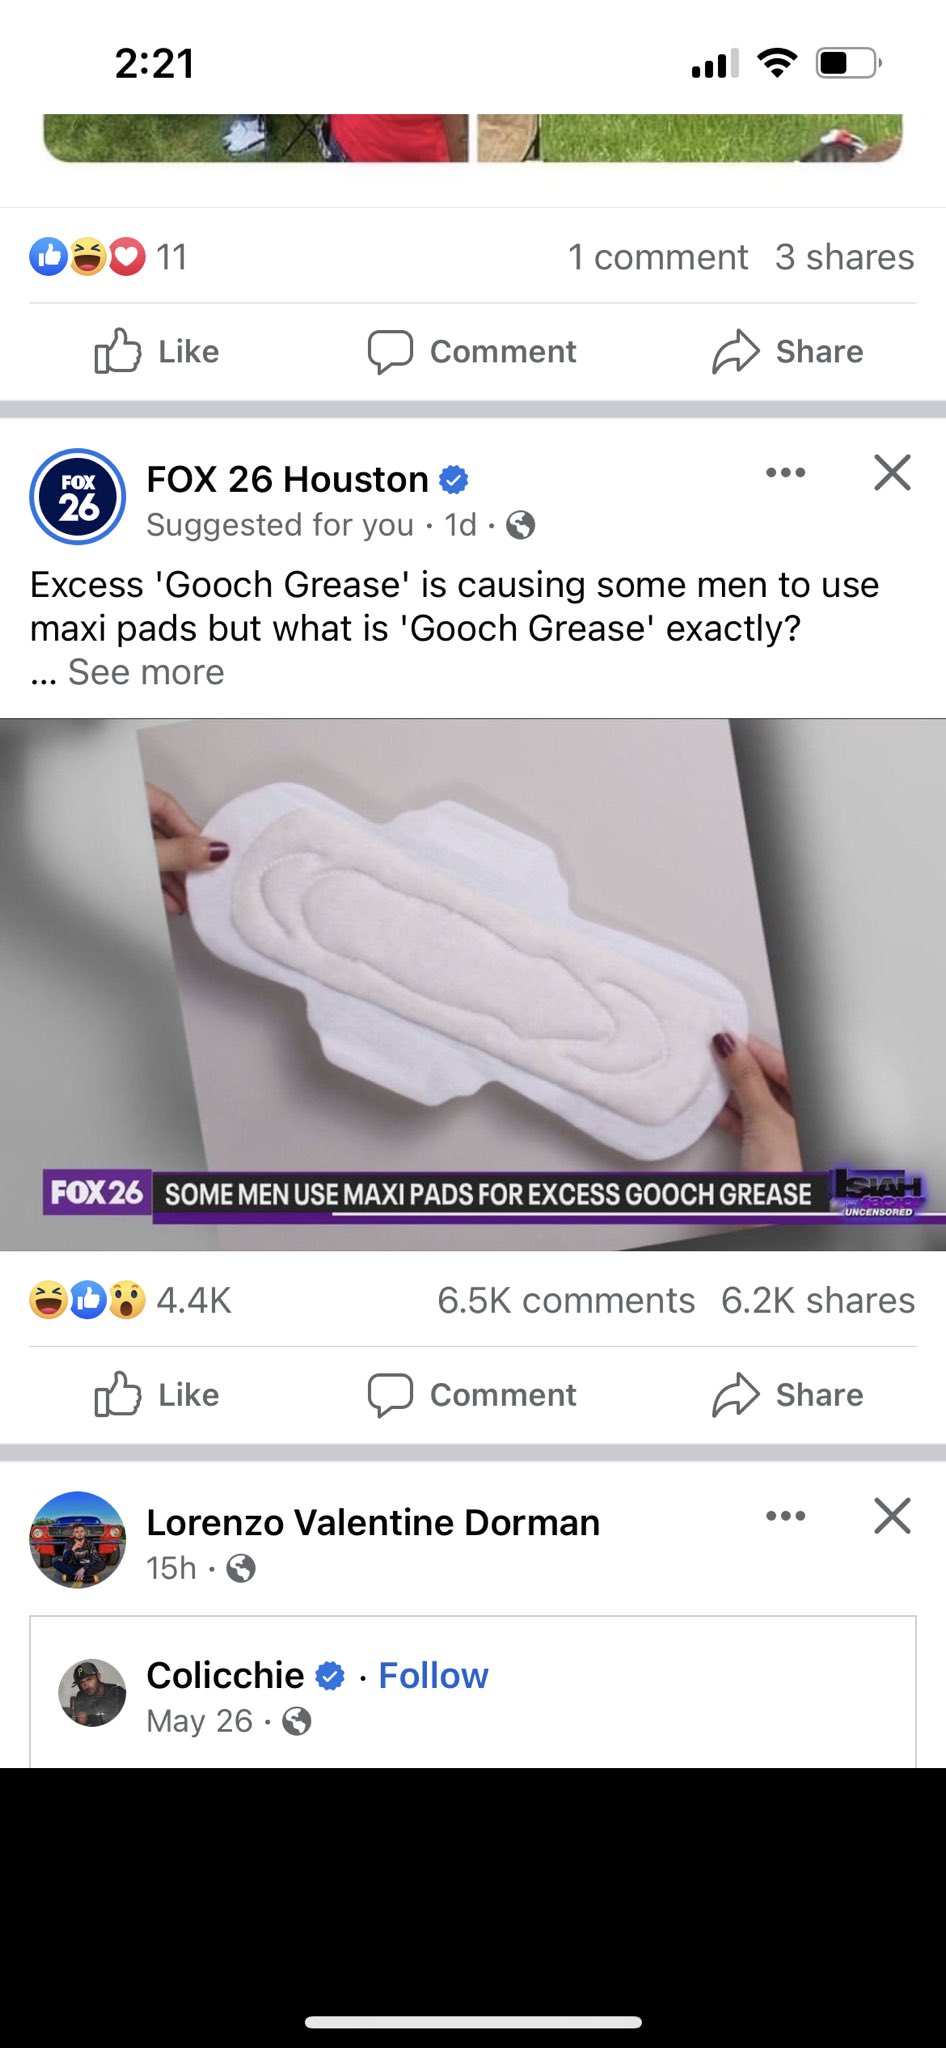 What is Gooch Grease?: Some men using maxi pads cause of excess